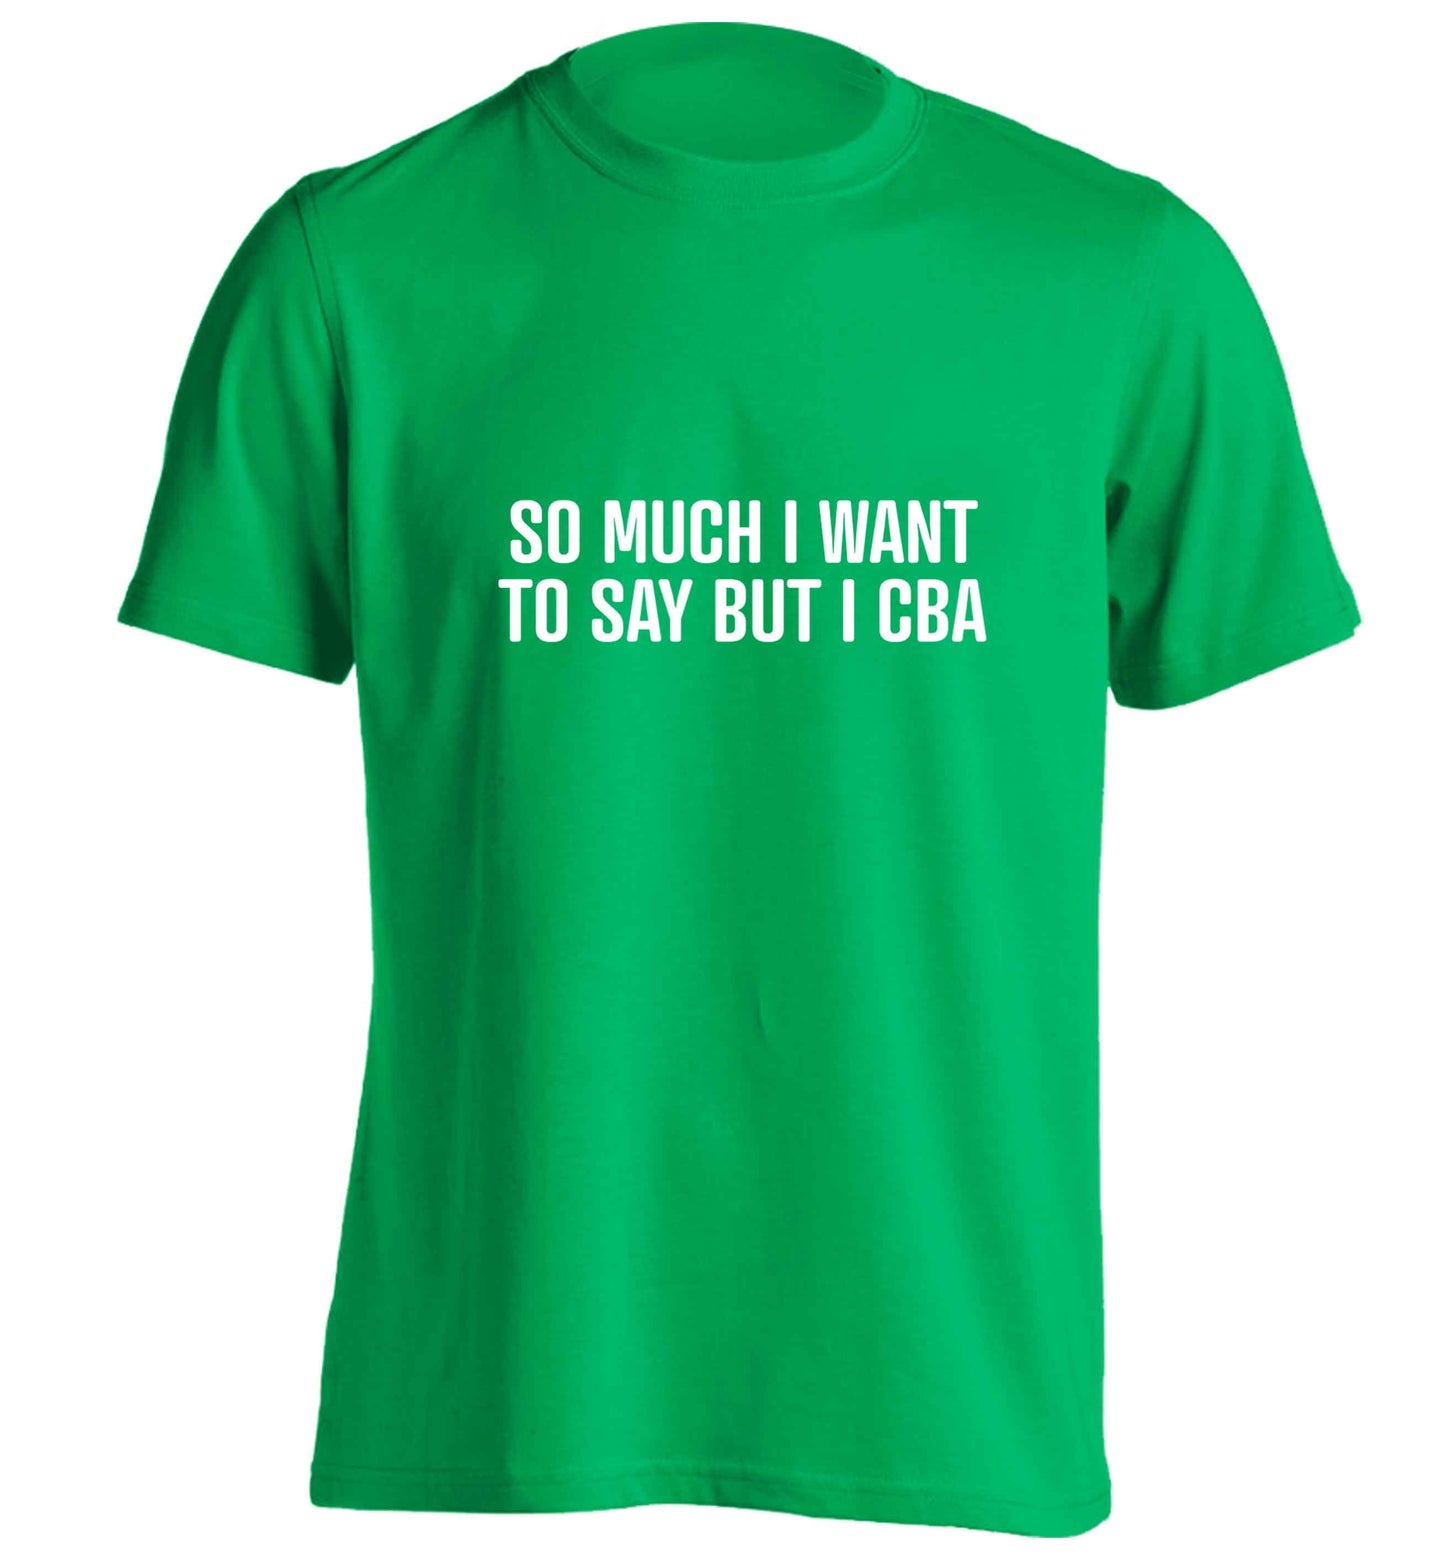 So much I want to say I cba  adults unisex green Tshirt 2XL